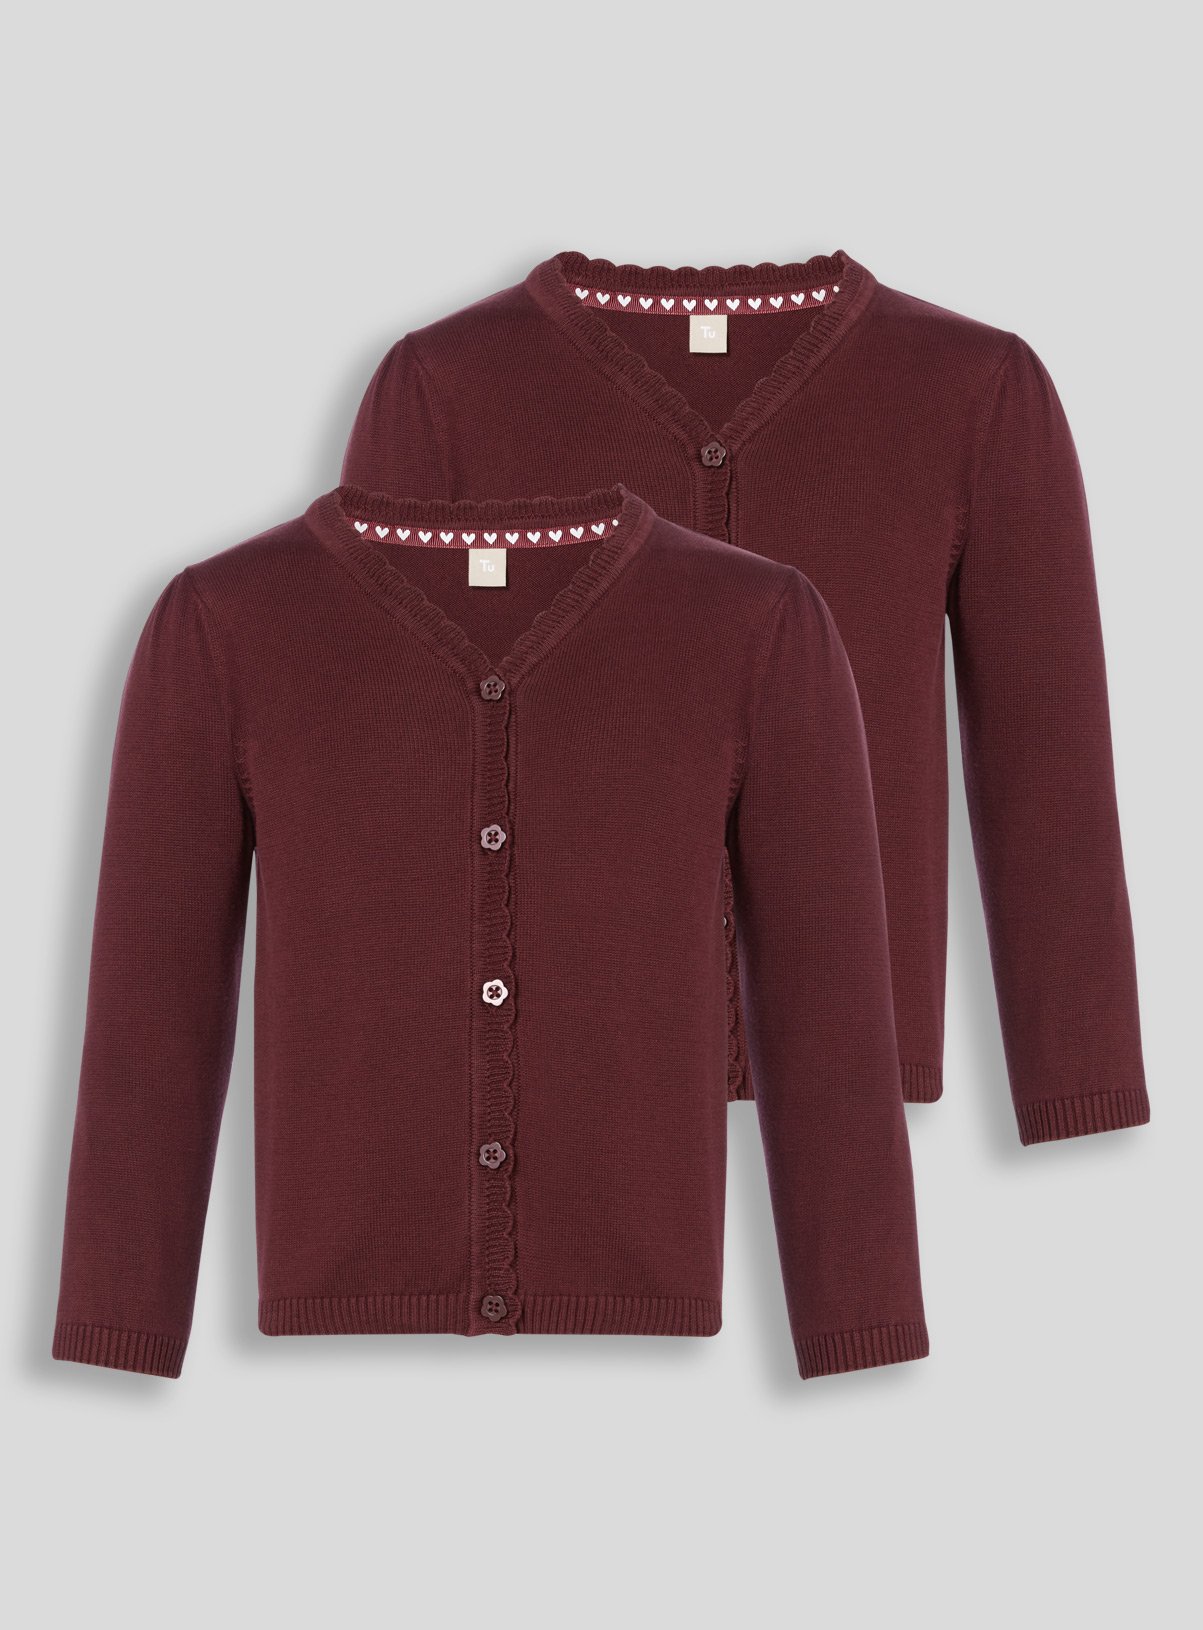 Dark Red Scalloped Cardigan 2 Pack Review